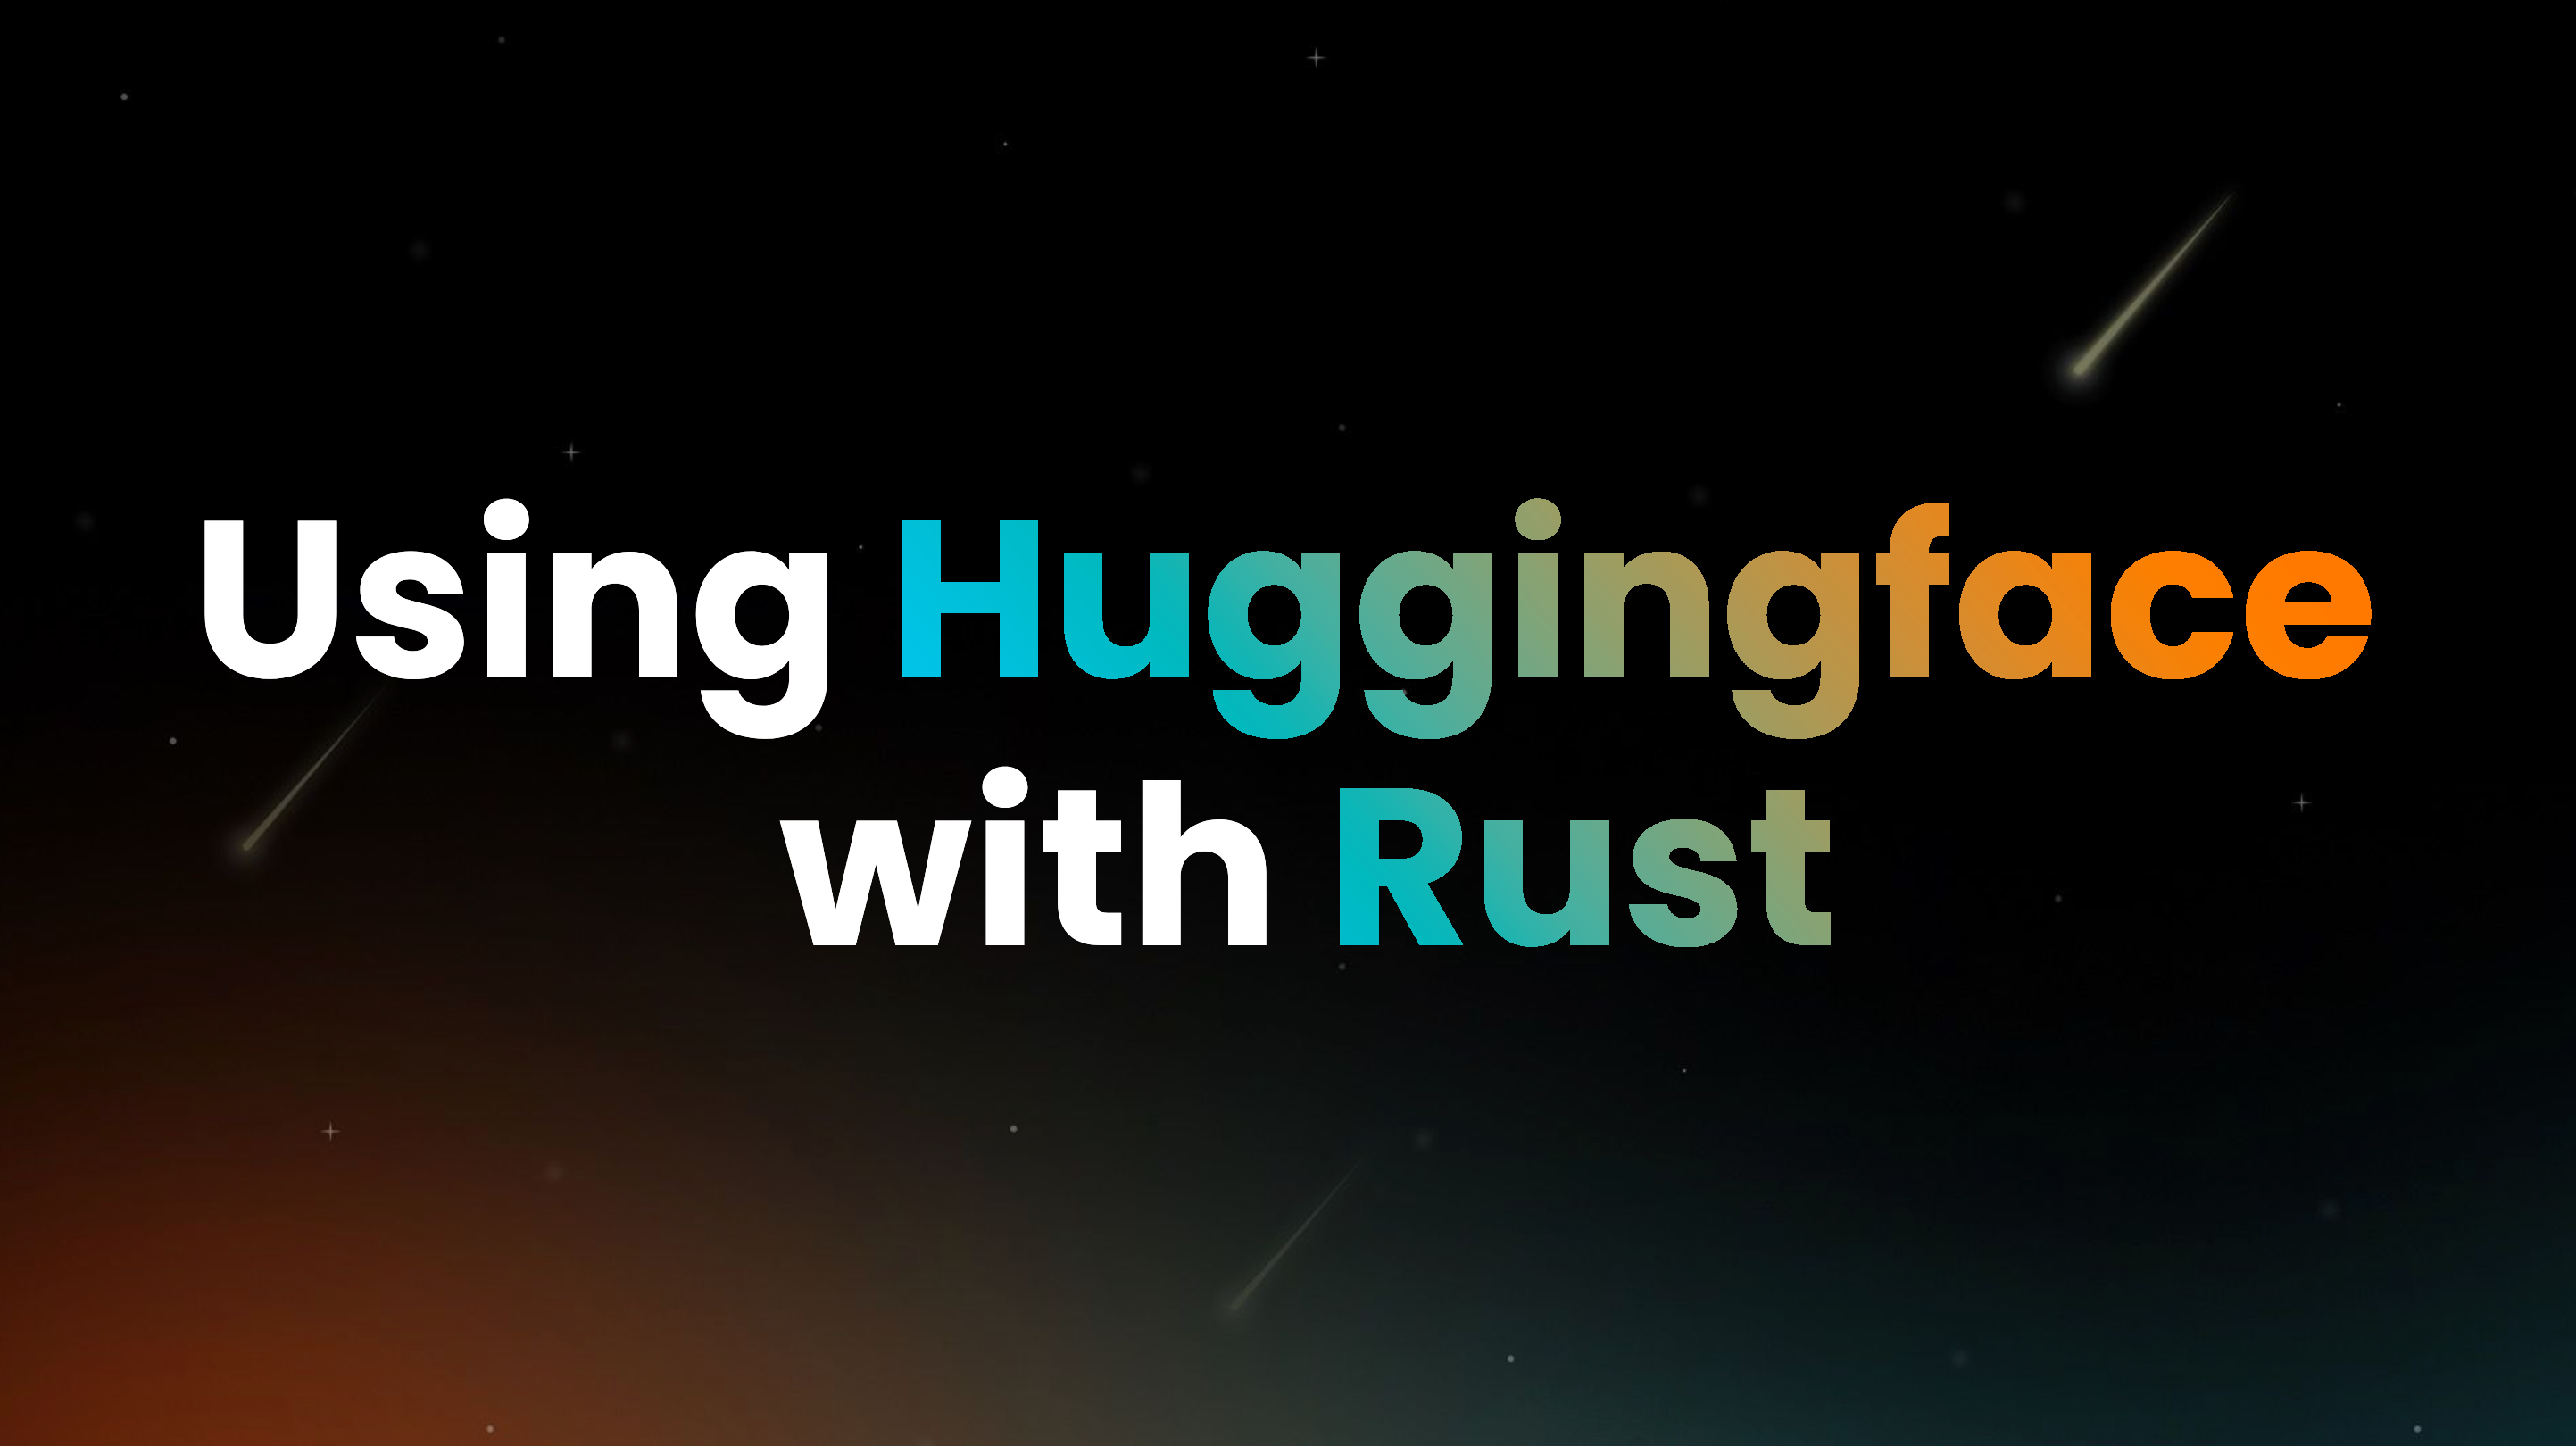 Using Huggingface with Rust